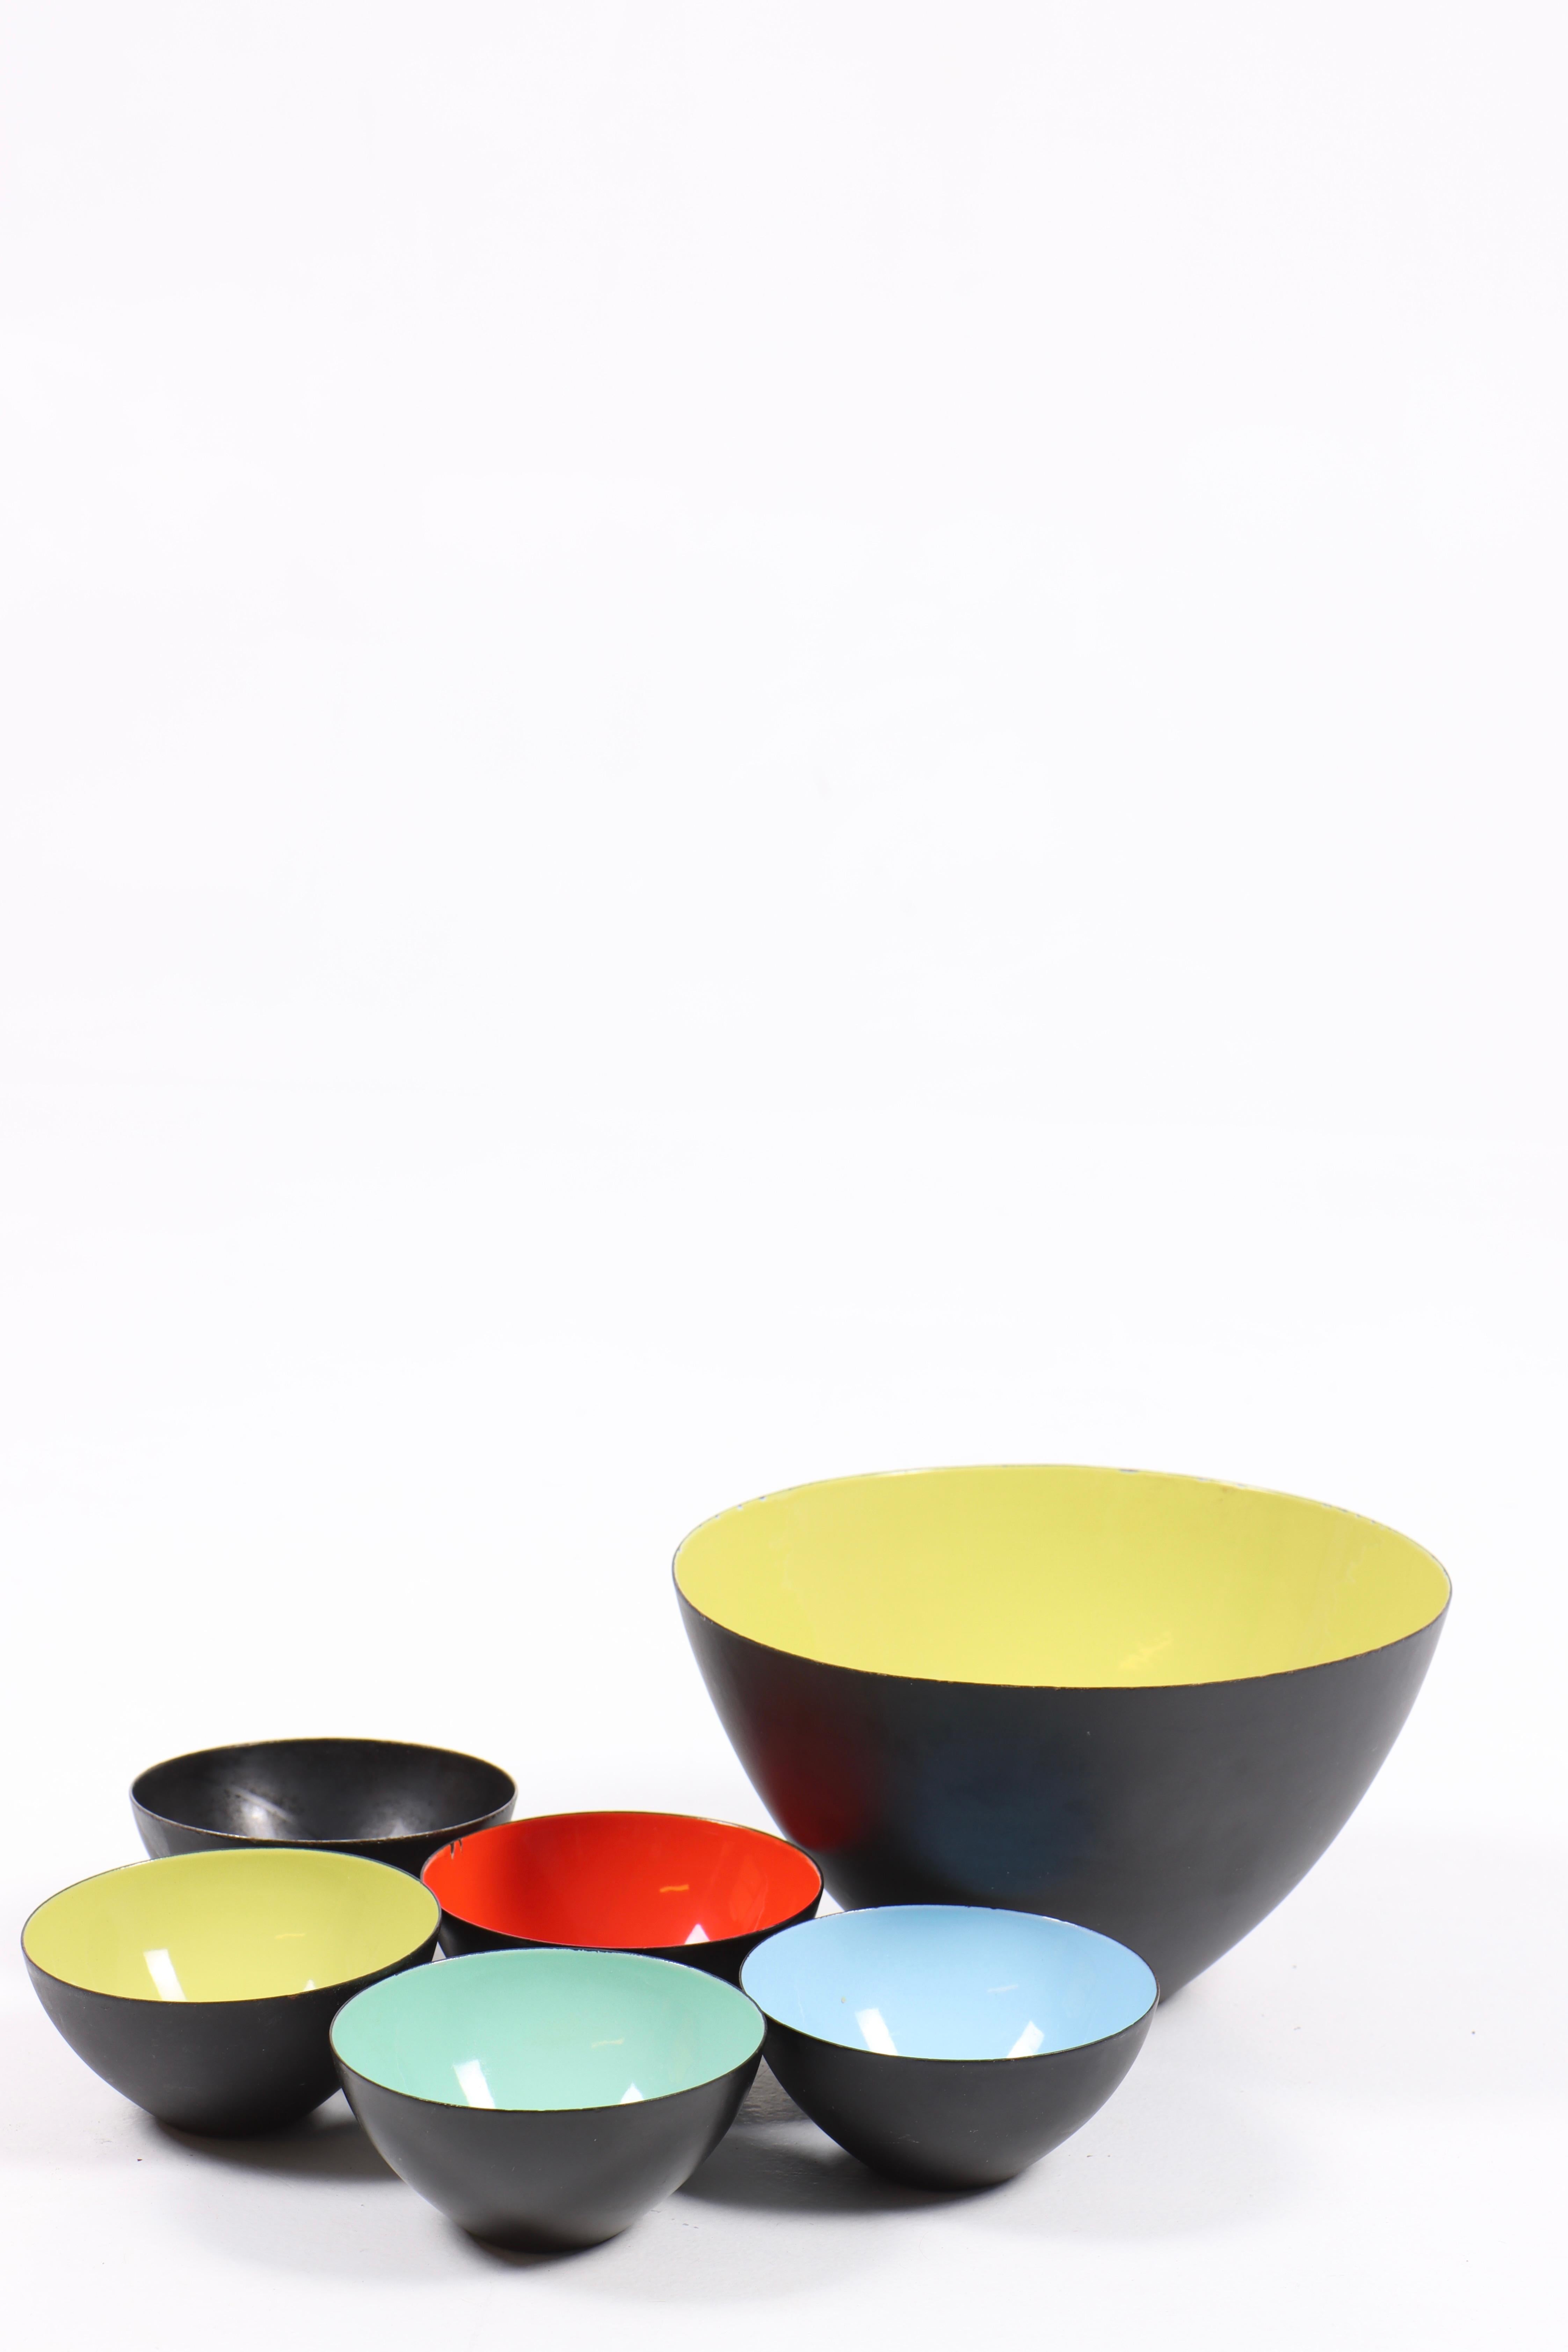 Scandinavian Collection of Six Krenit Bowls by Herbert Krenchel, Made in Denmark, 1950s For Sale